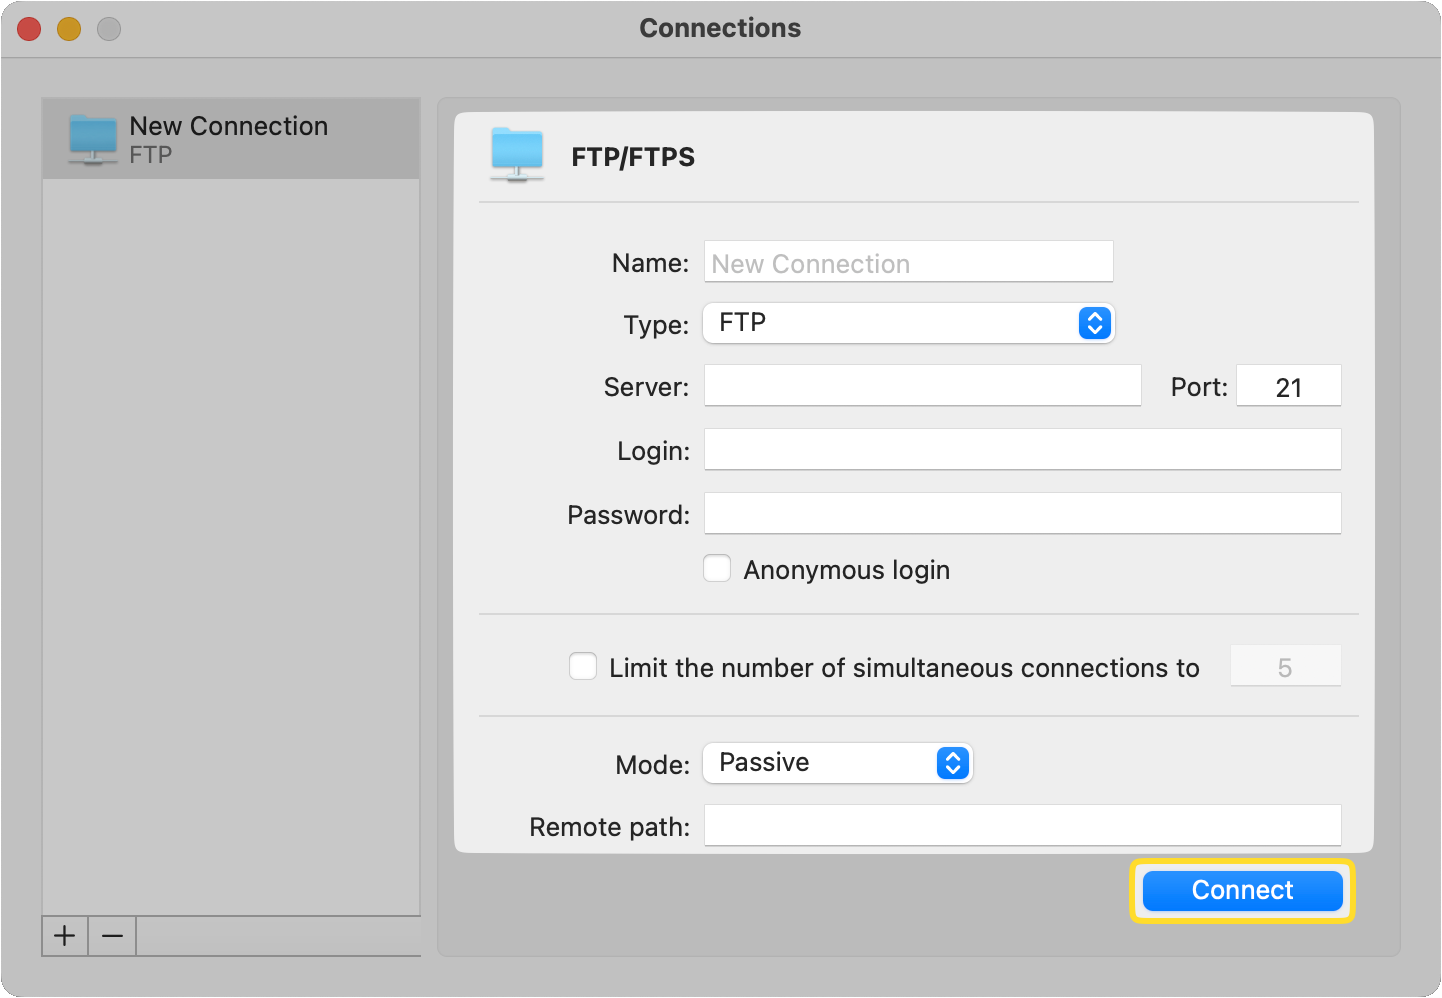 The New Connection of the FTP/FTPS window in C1